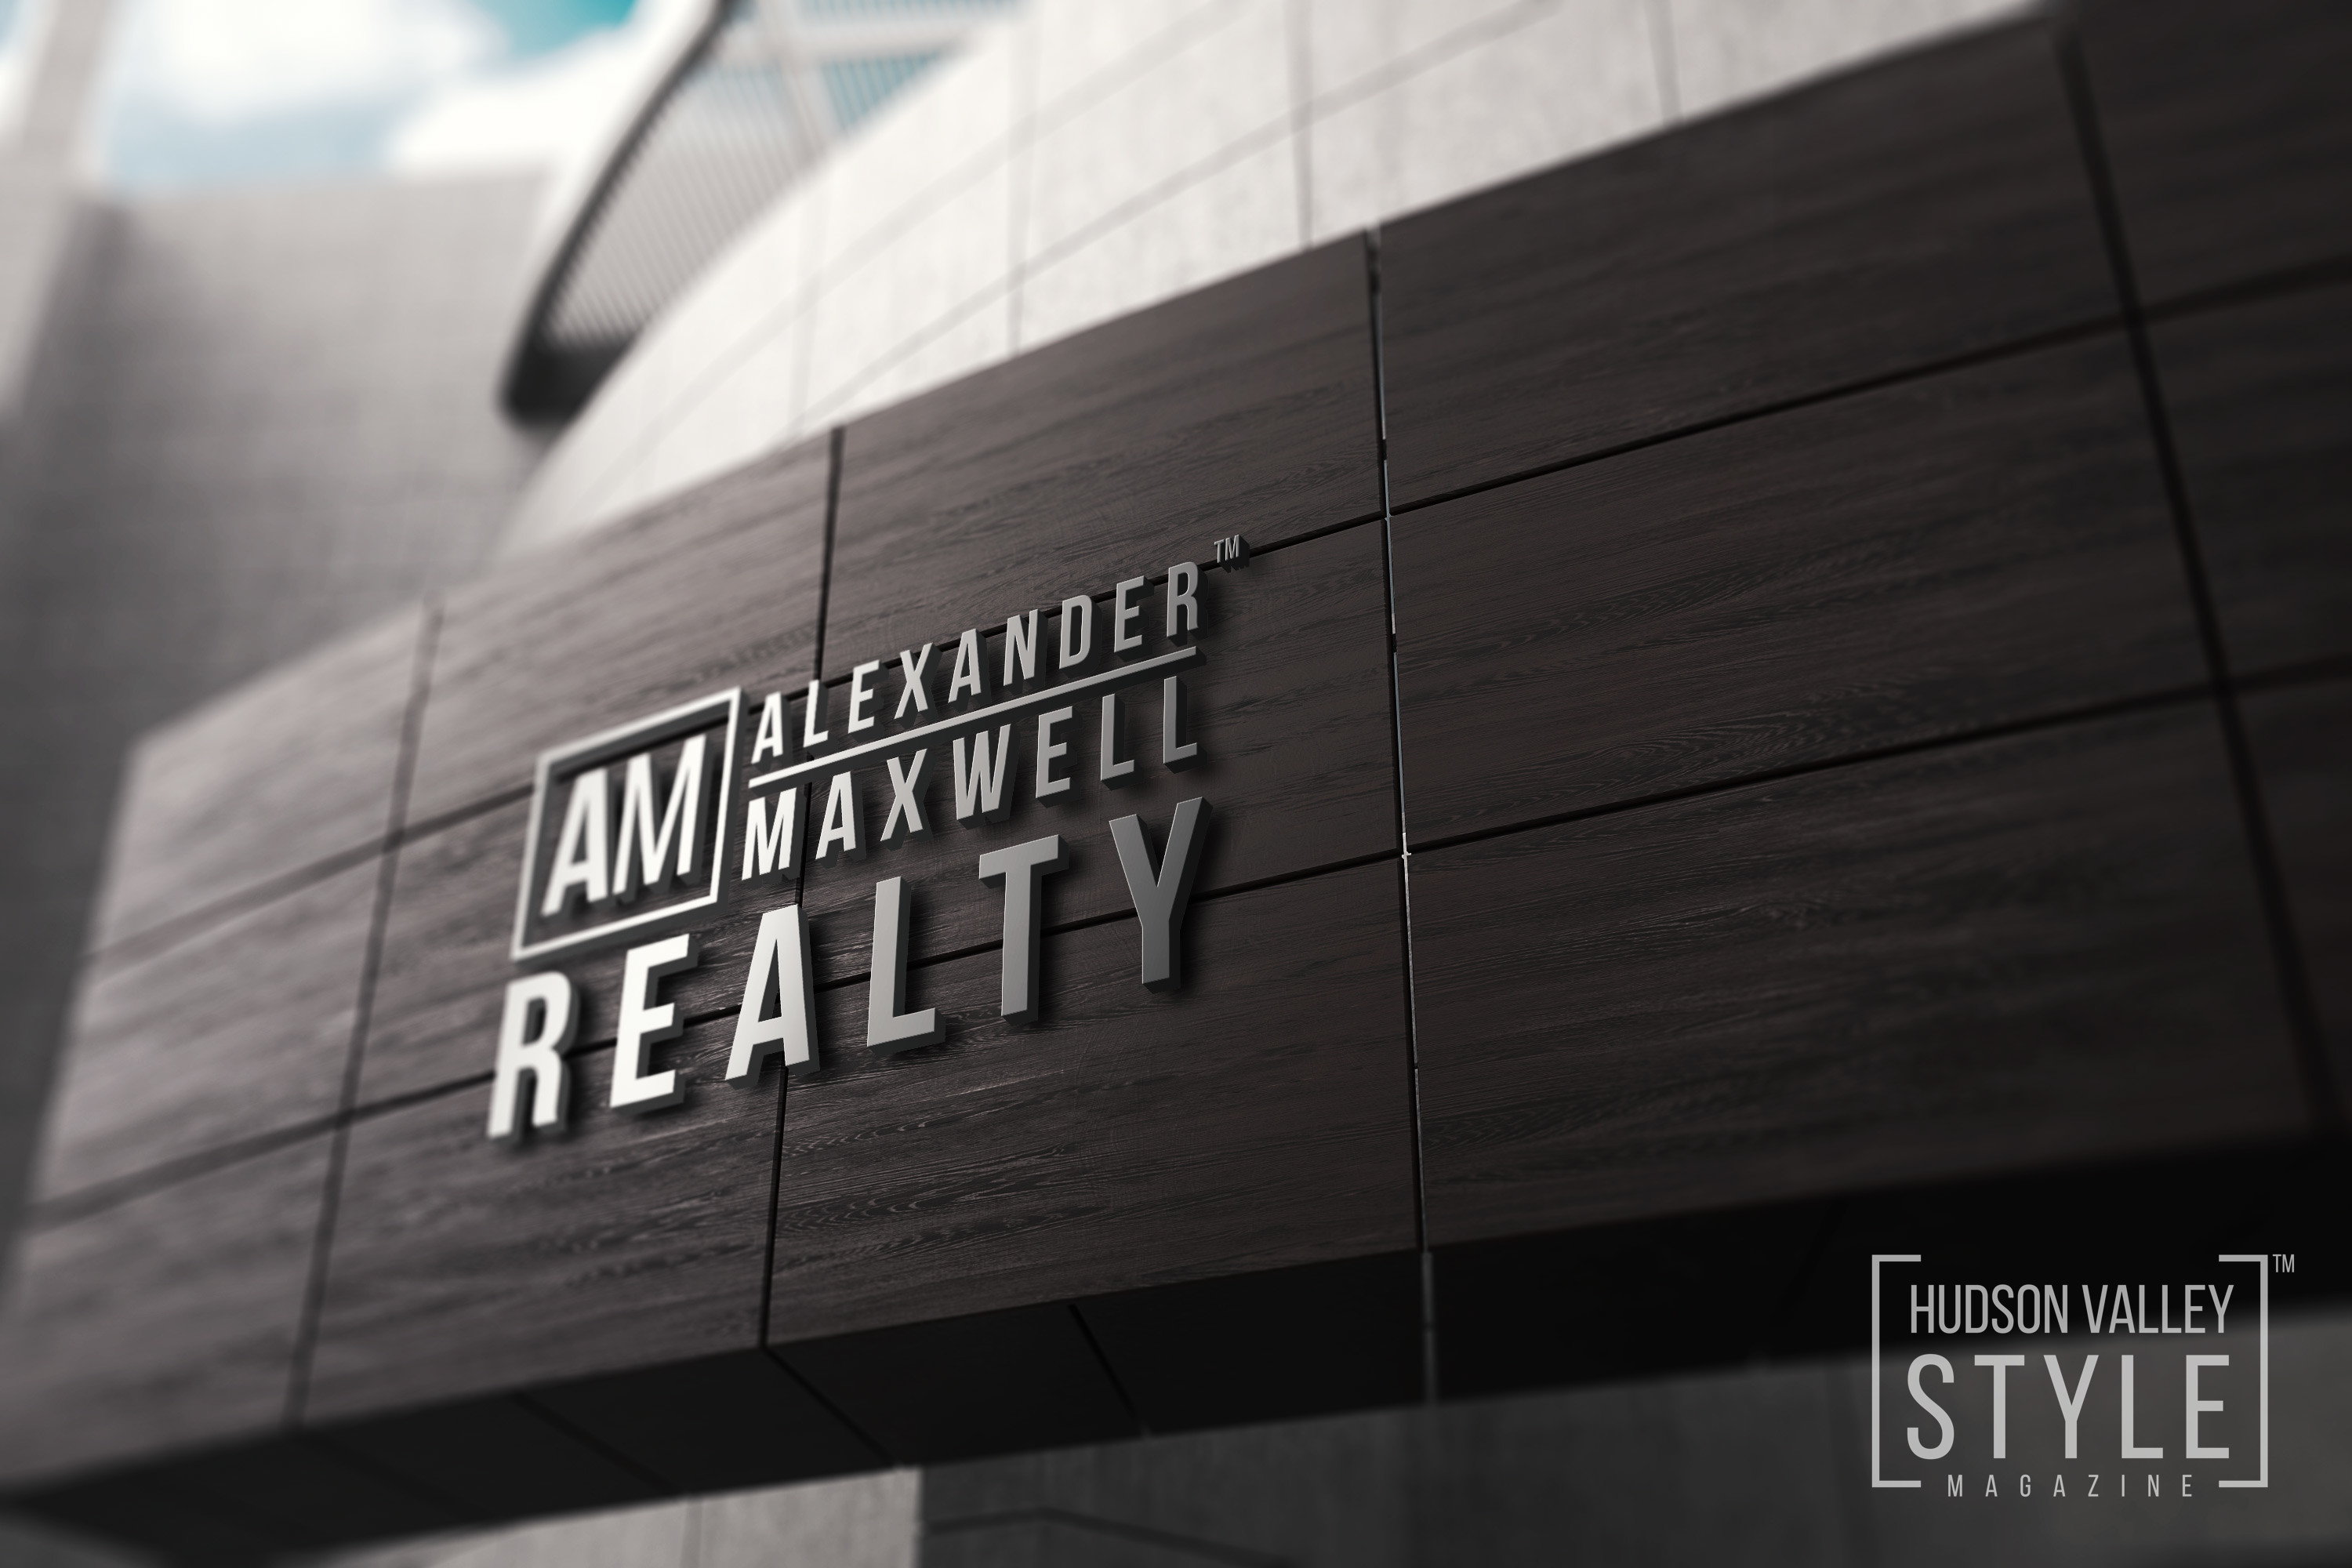 Alexander Maxwell Realty has revolutionized Hudson Valley Real Estate Industry with its Strategic Marketing Approach